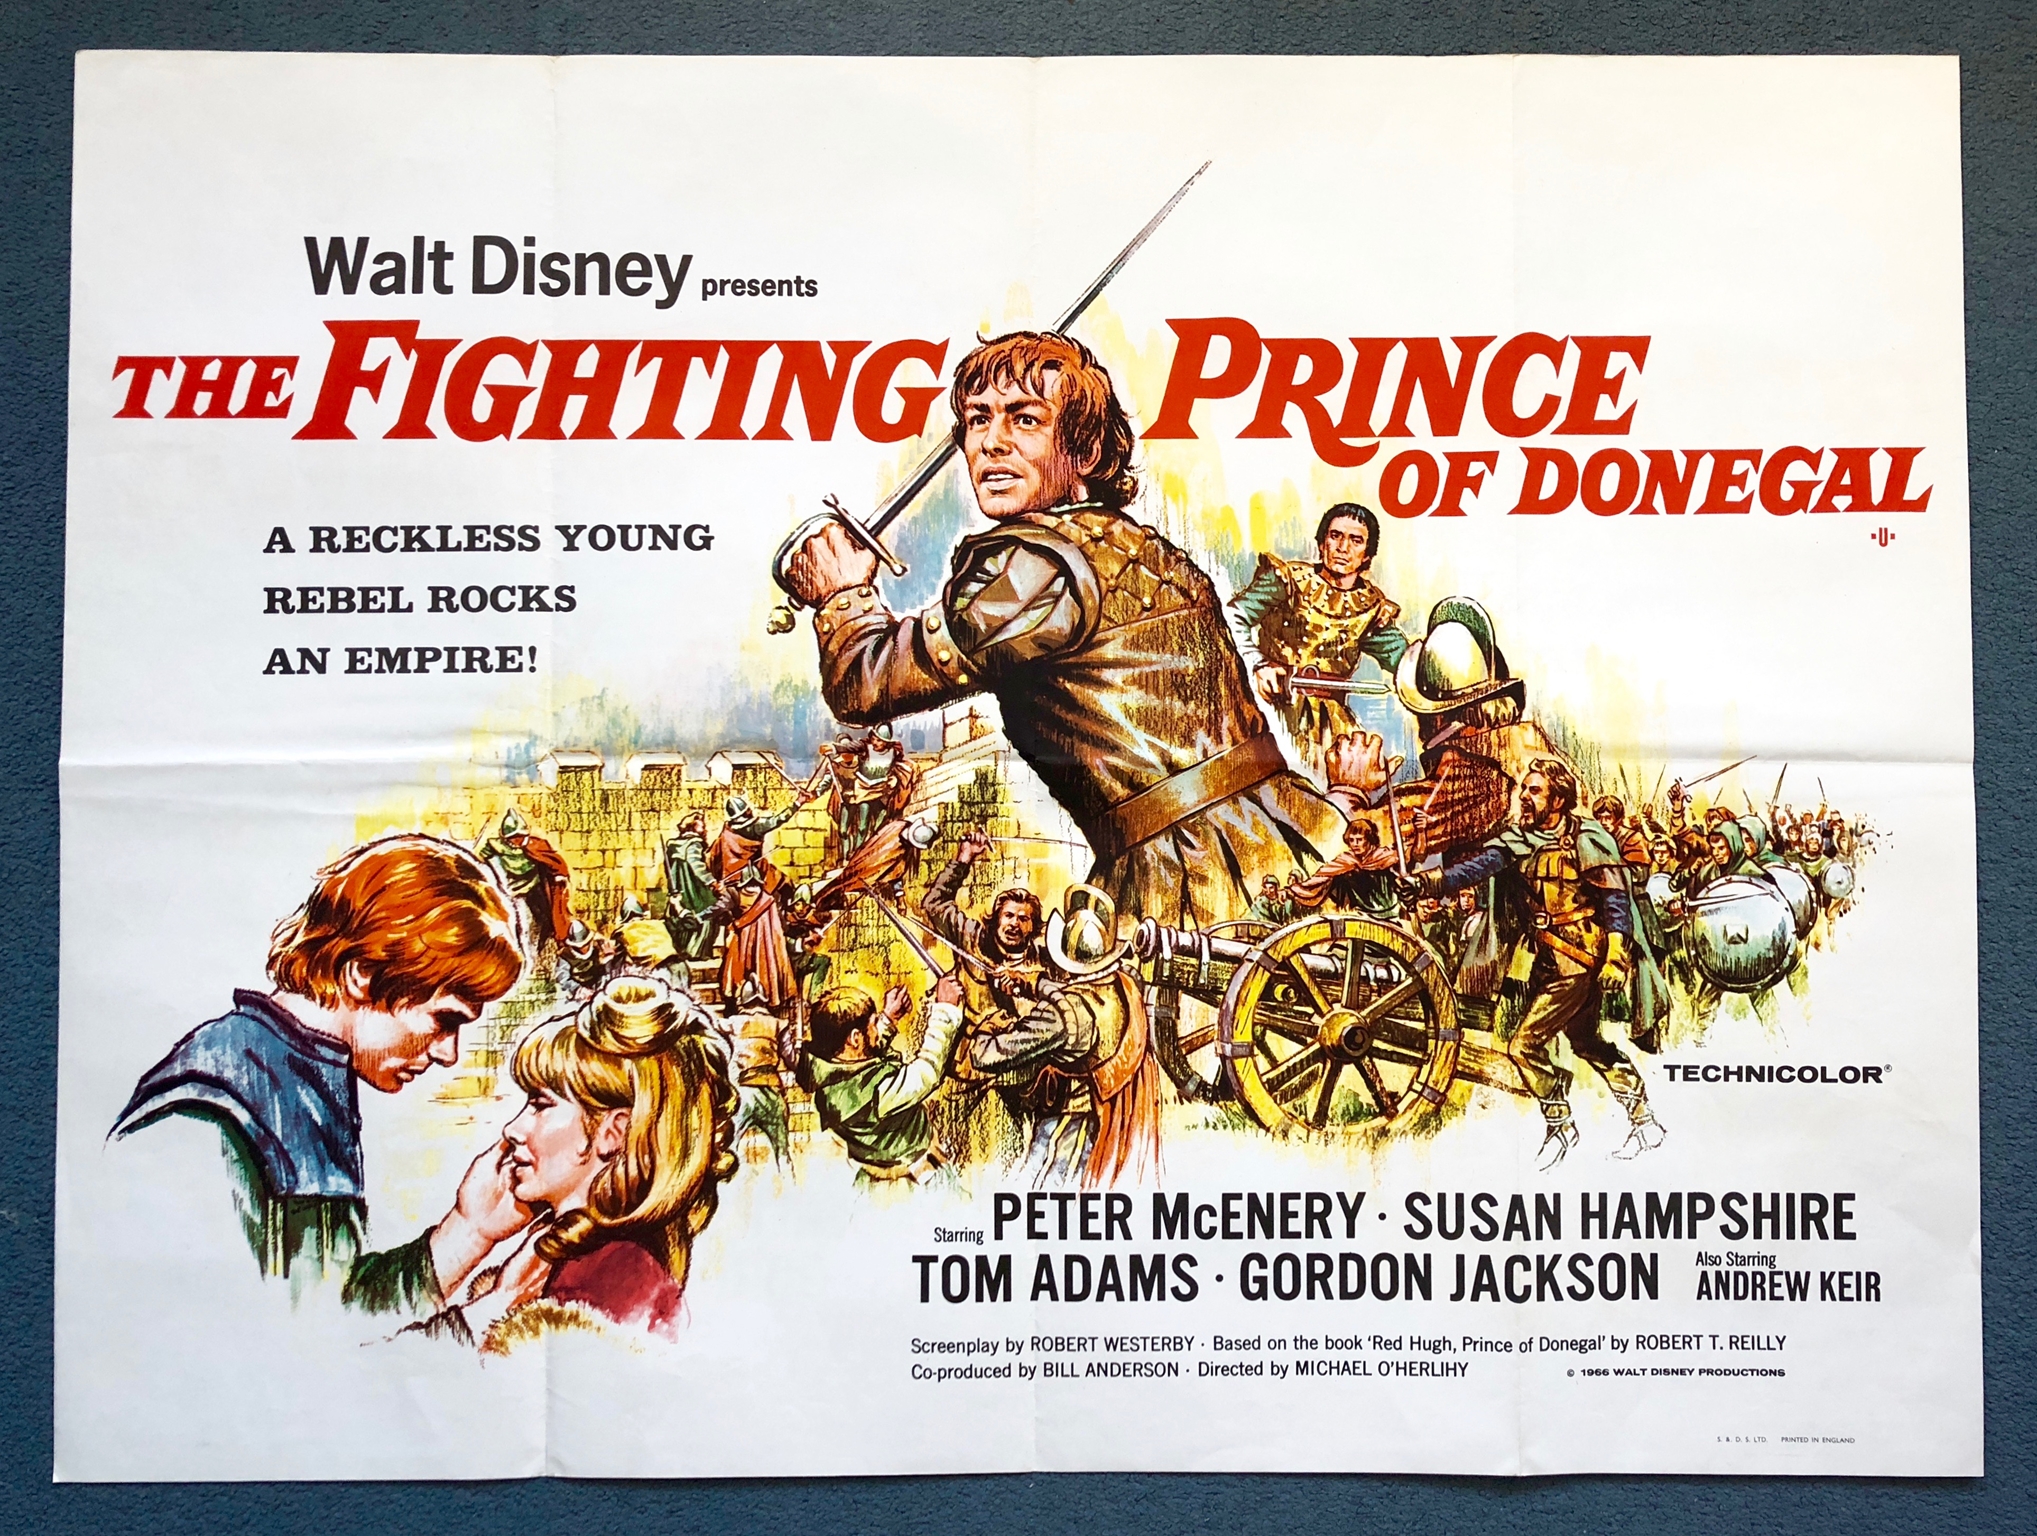 THE FIGHTING PRINCE OF DONEGAL (1966) - UK Quad Film Poster - 30" x 40" (76 x 101.5 cm) - Folded (as